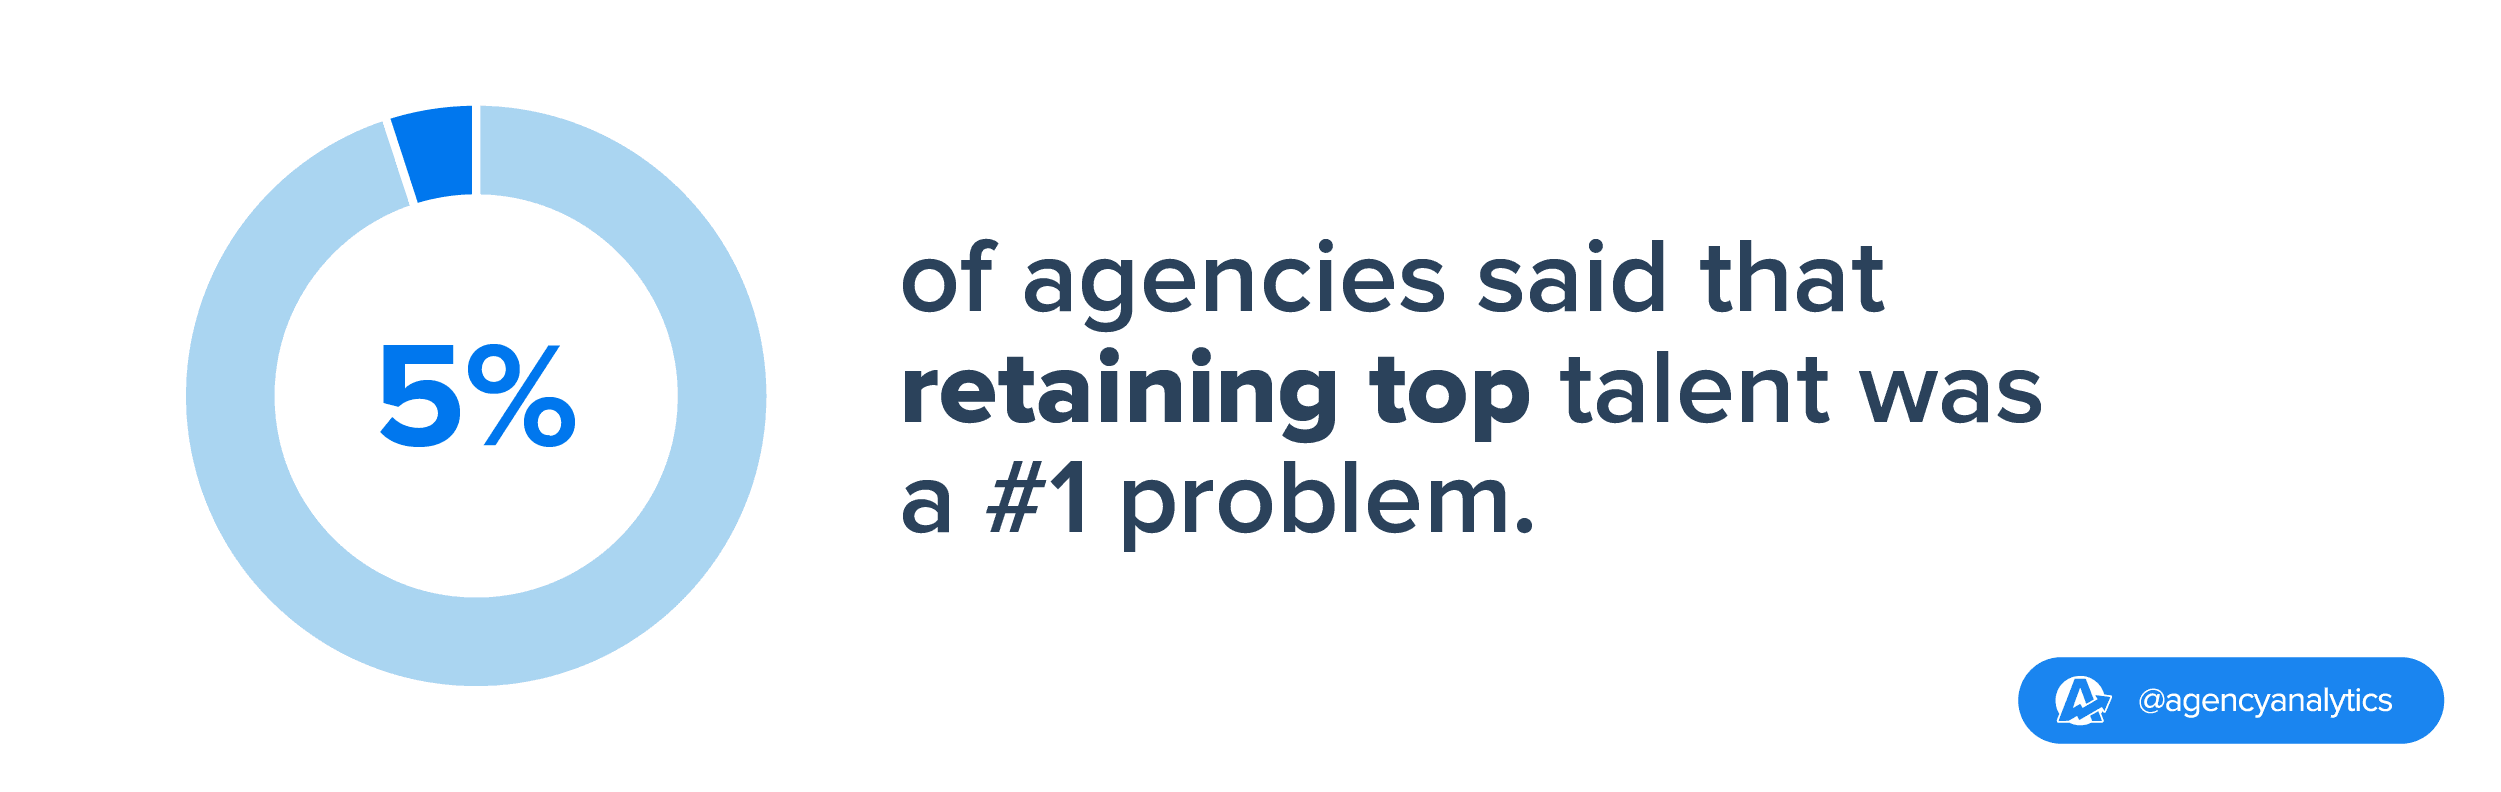 only 5% of agencies reported struggling with retaining top talent